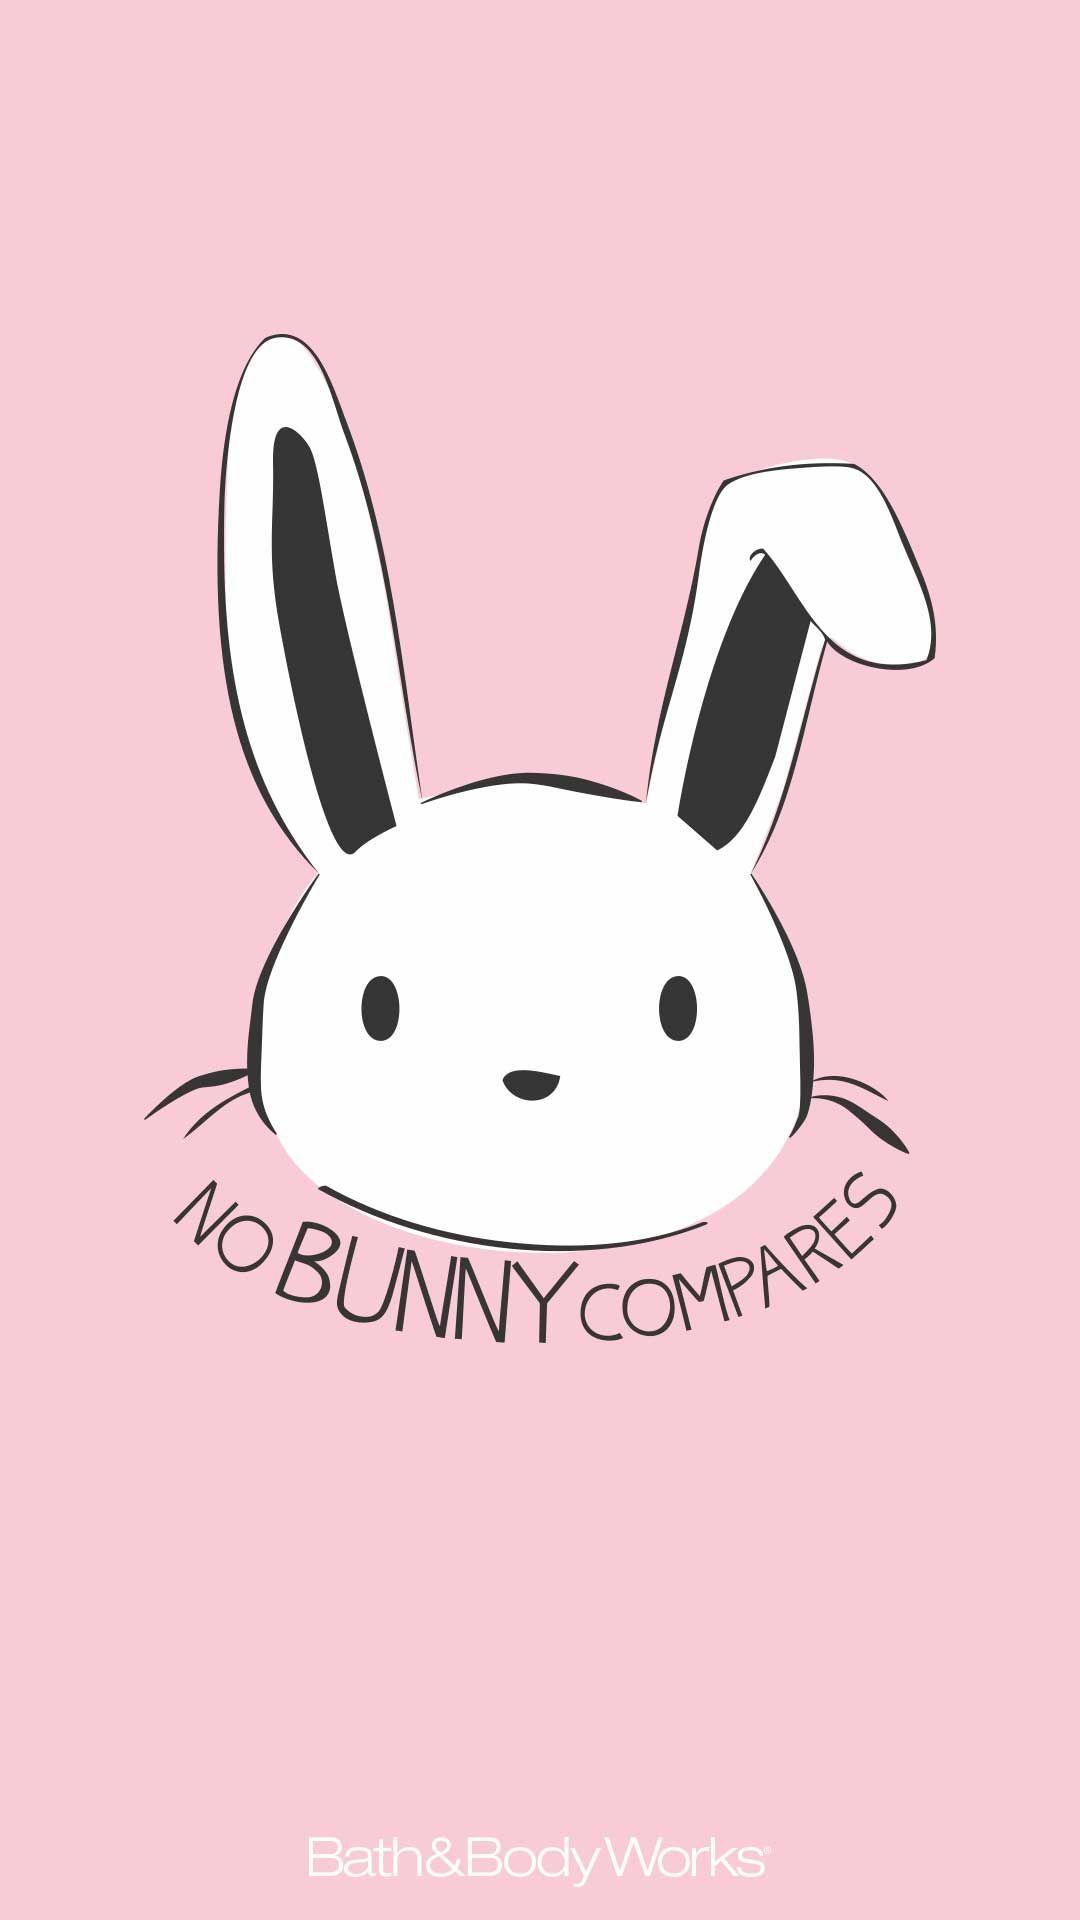 No Bunny Compares Easter iPhone Wallpaper. Bunny wallpaper, Easter wallpaper, Cute iphone 6 wallpaper